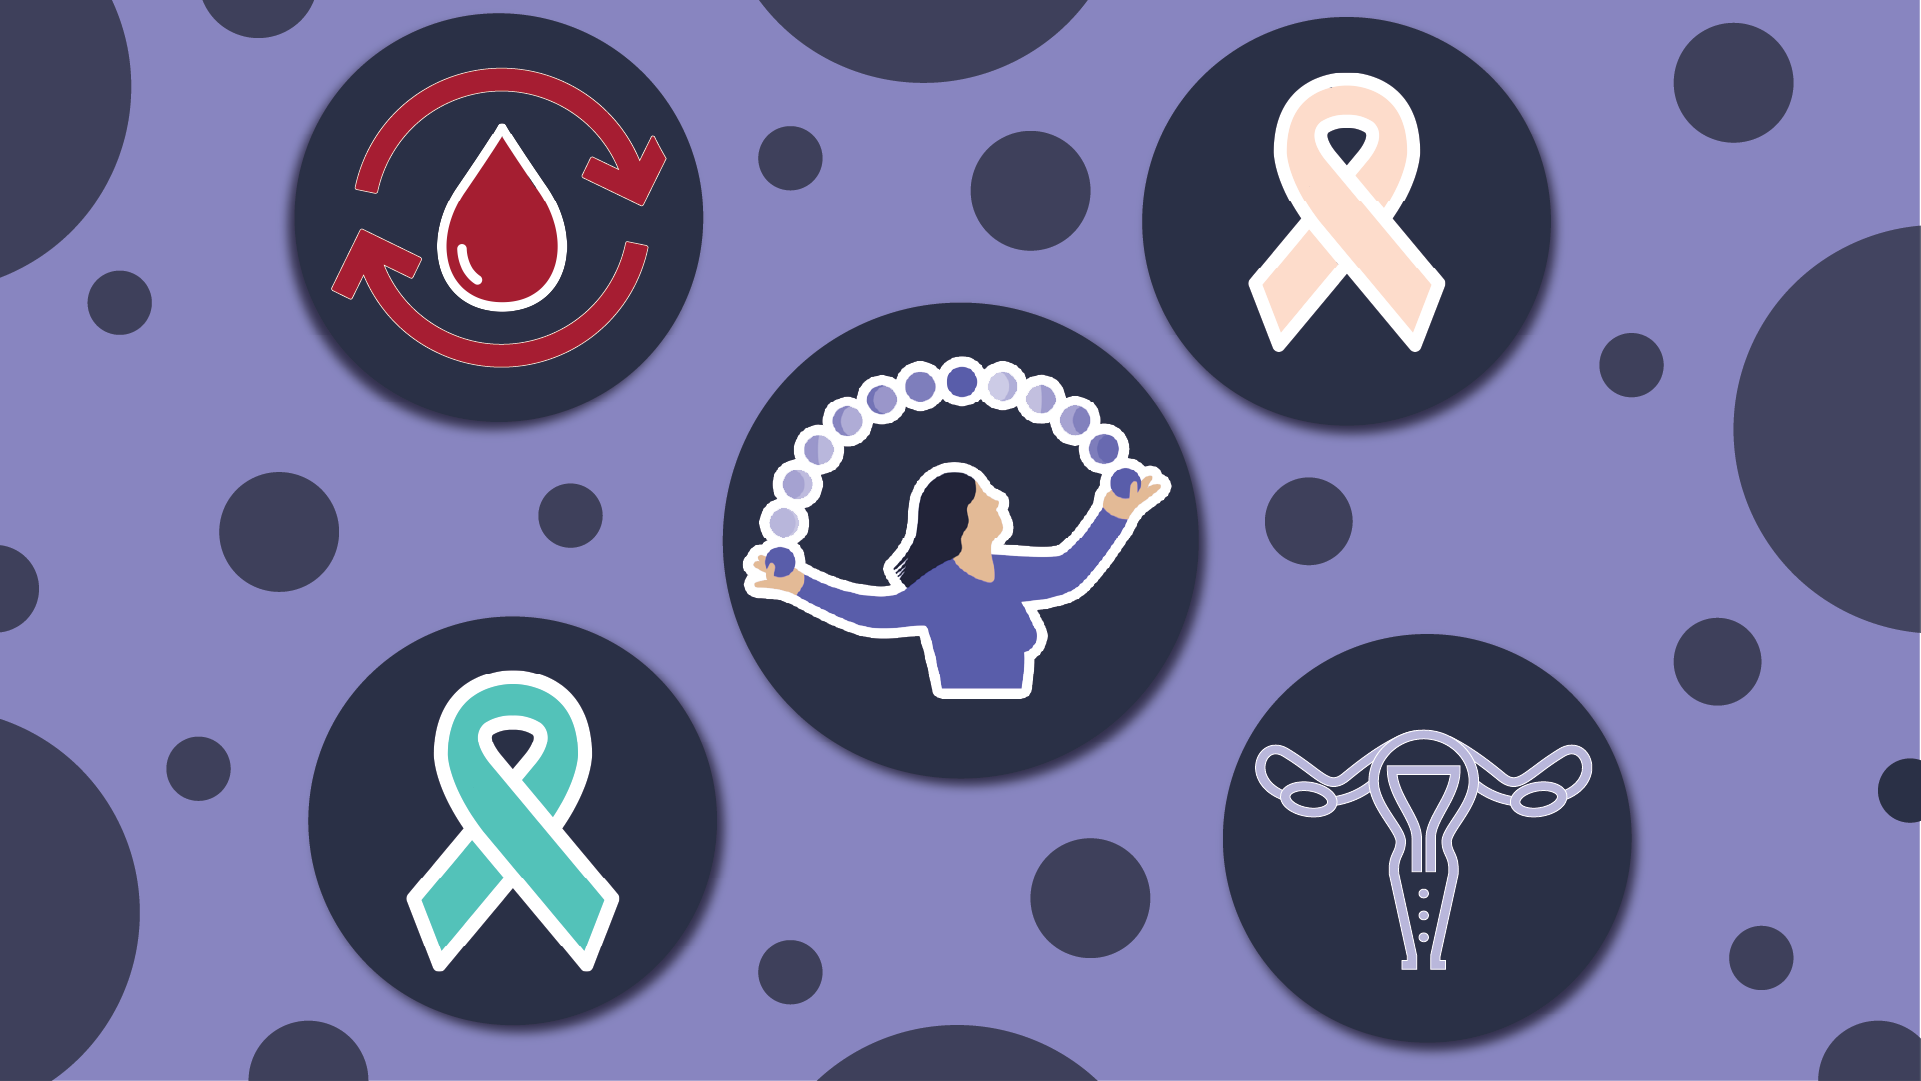 a light purple background with dark purple circles. There are four larger circles in the center that have iconography that represents menstrual cycles, uterus, PCOS, endometrial cancer, and the Luna.